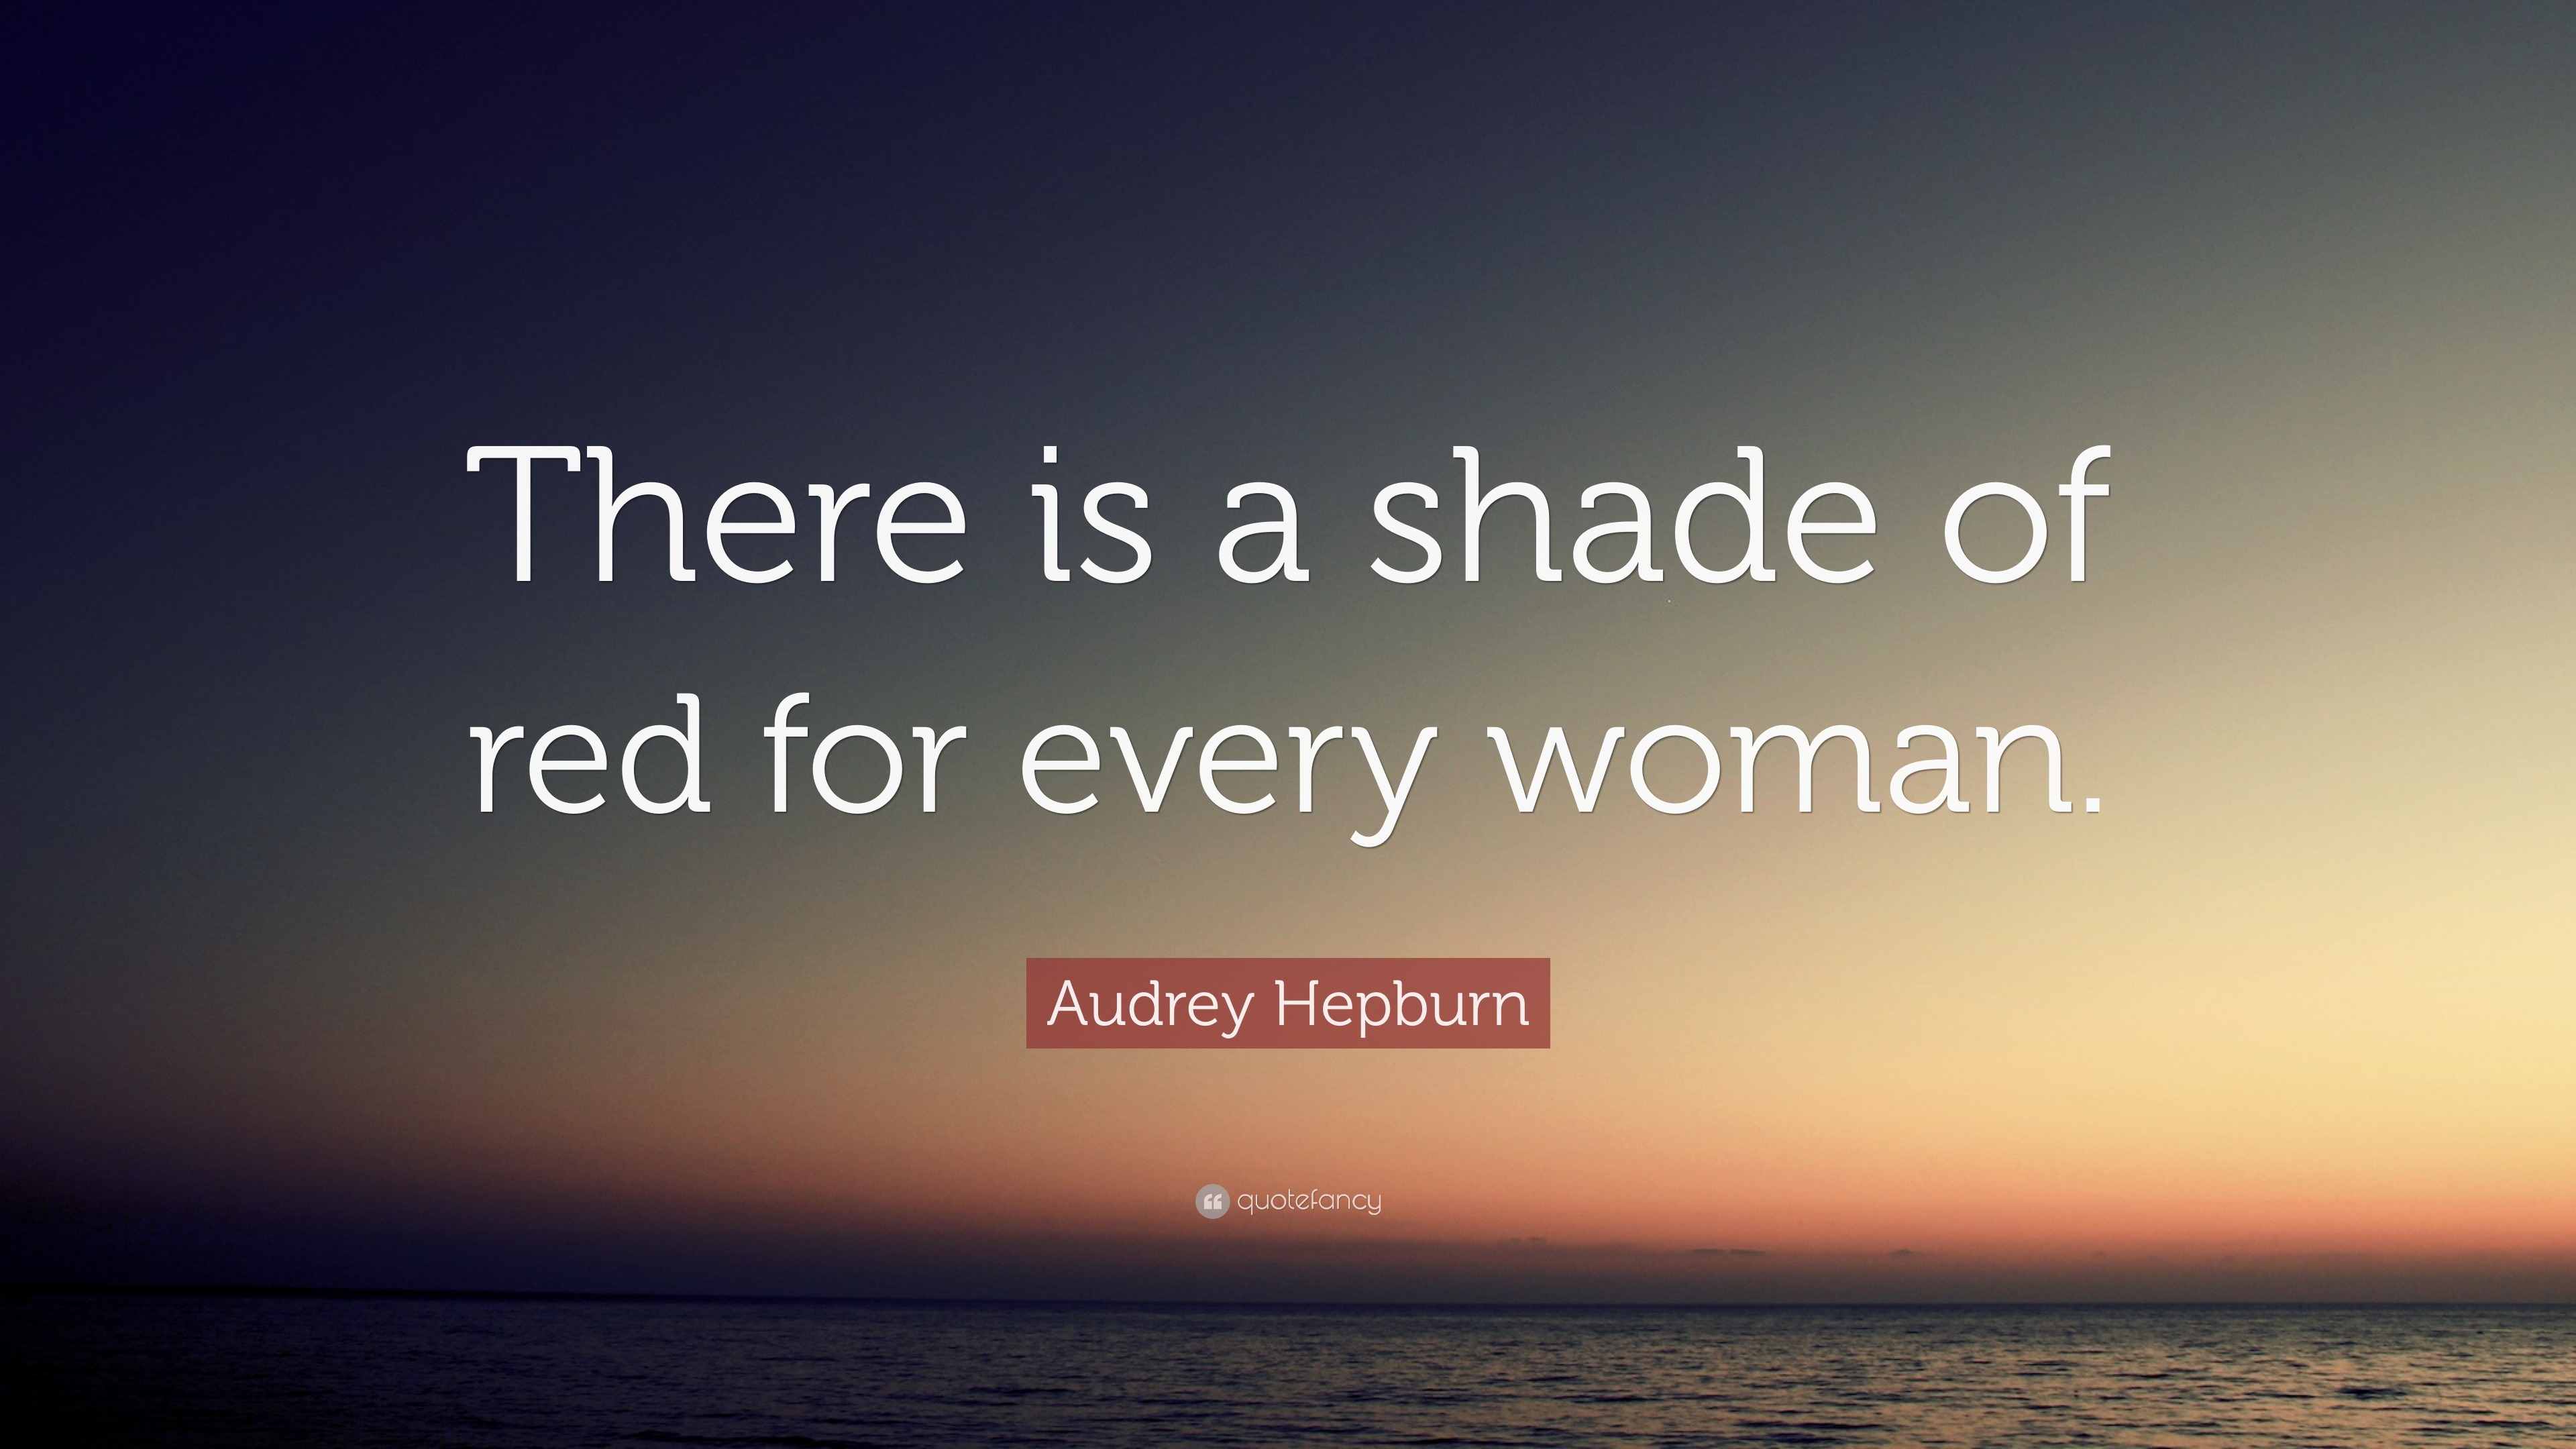 There is a shade of red for every woman ~ Audrey Hepburn 📷 by